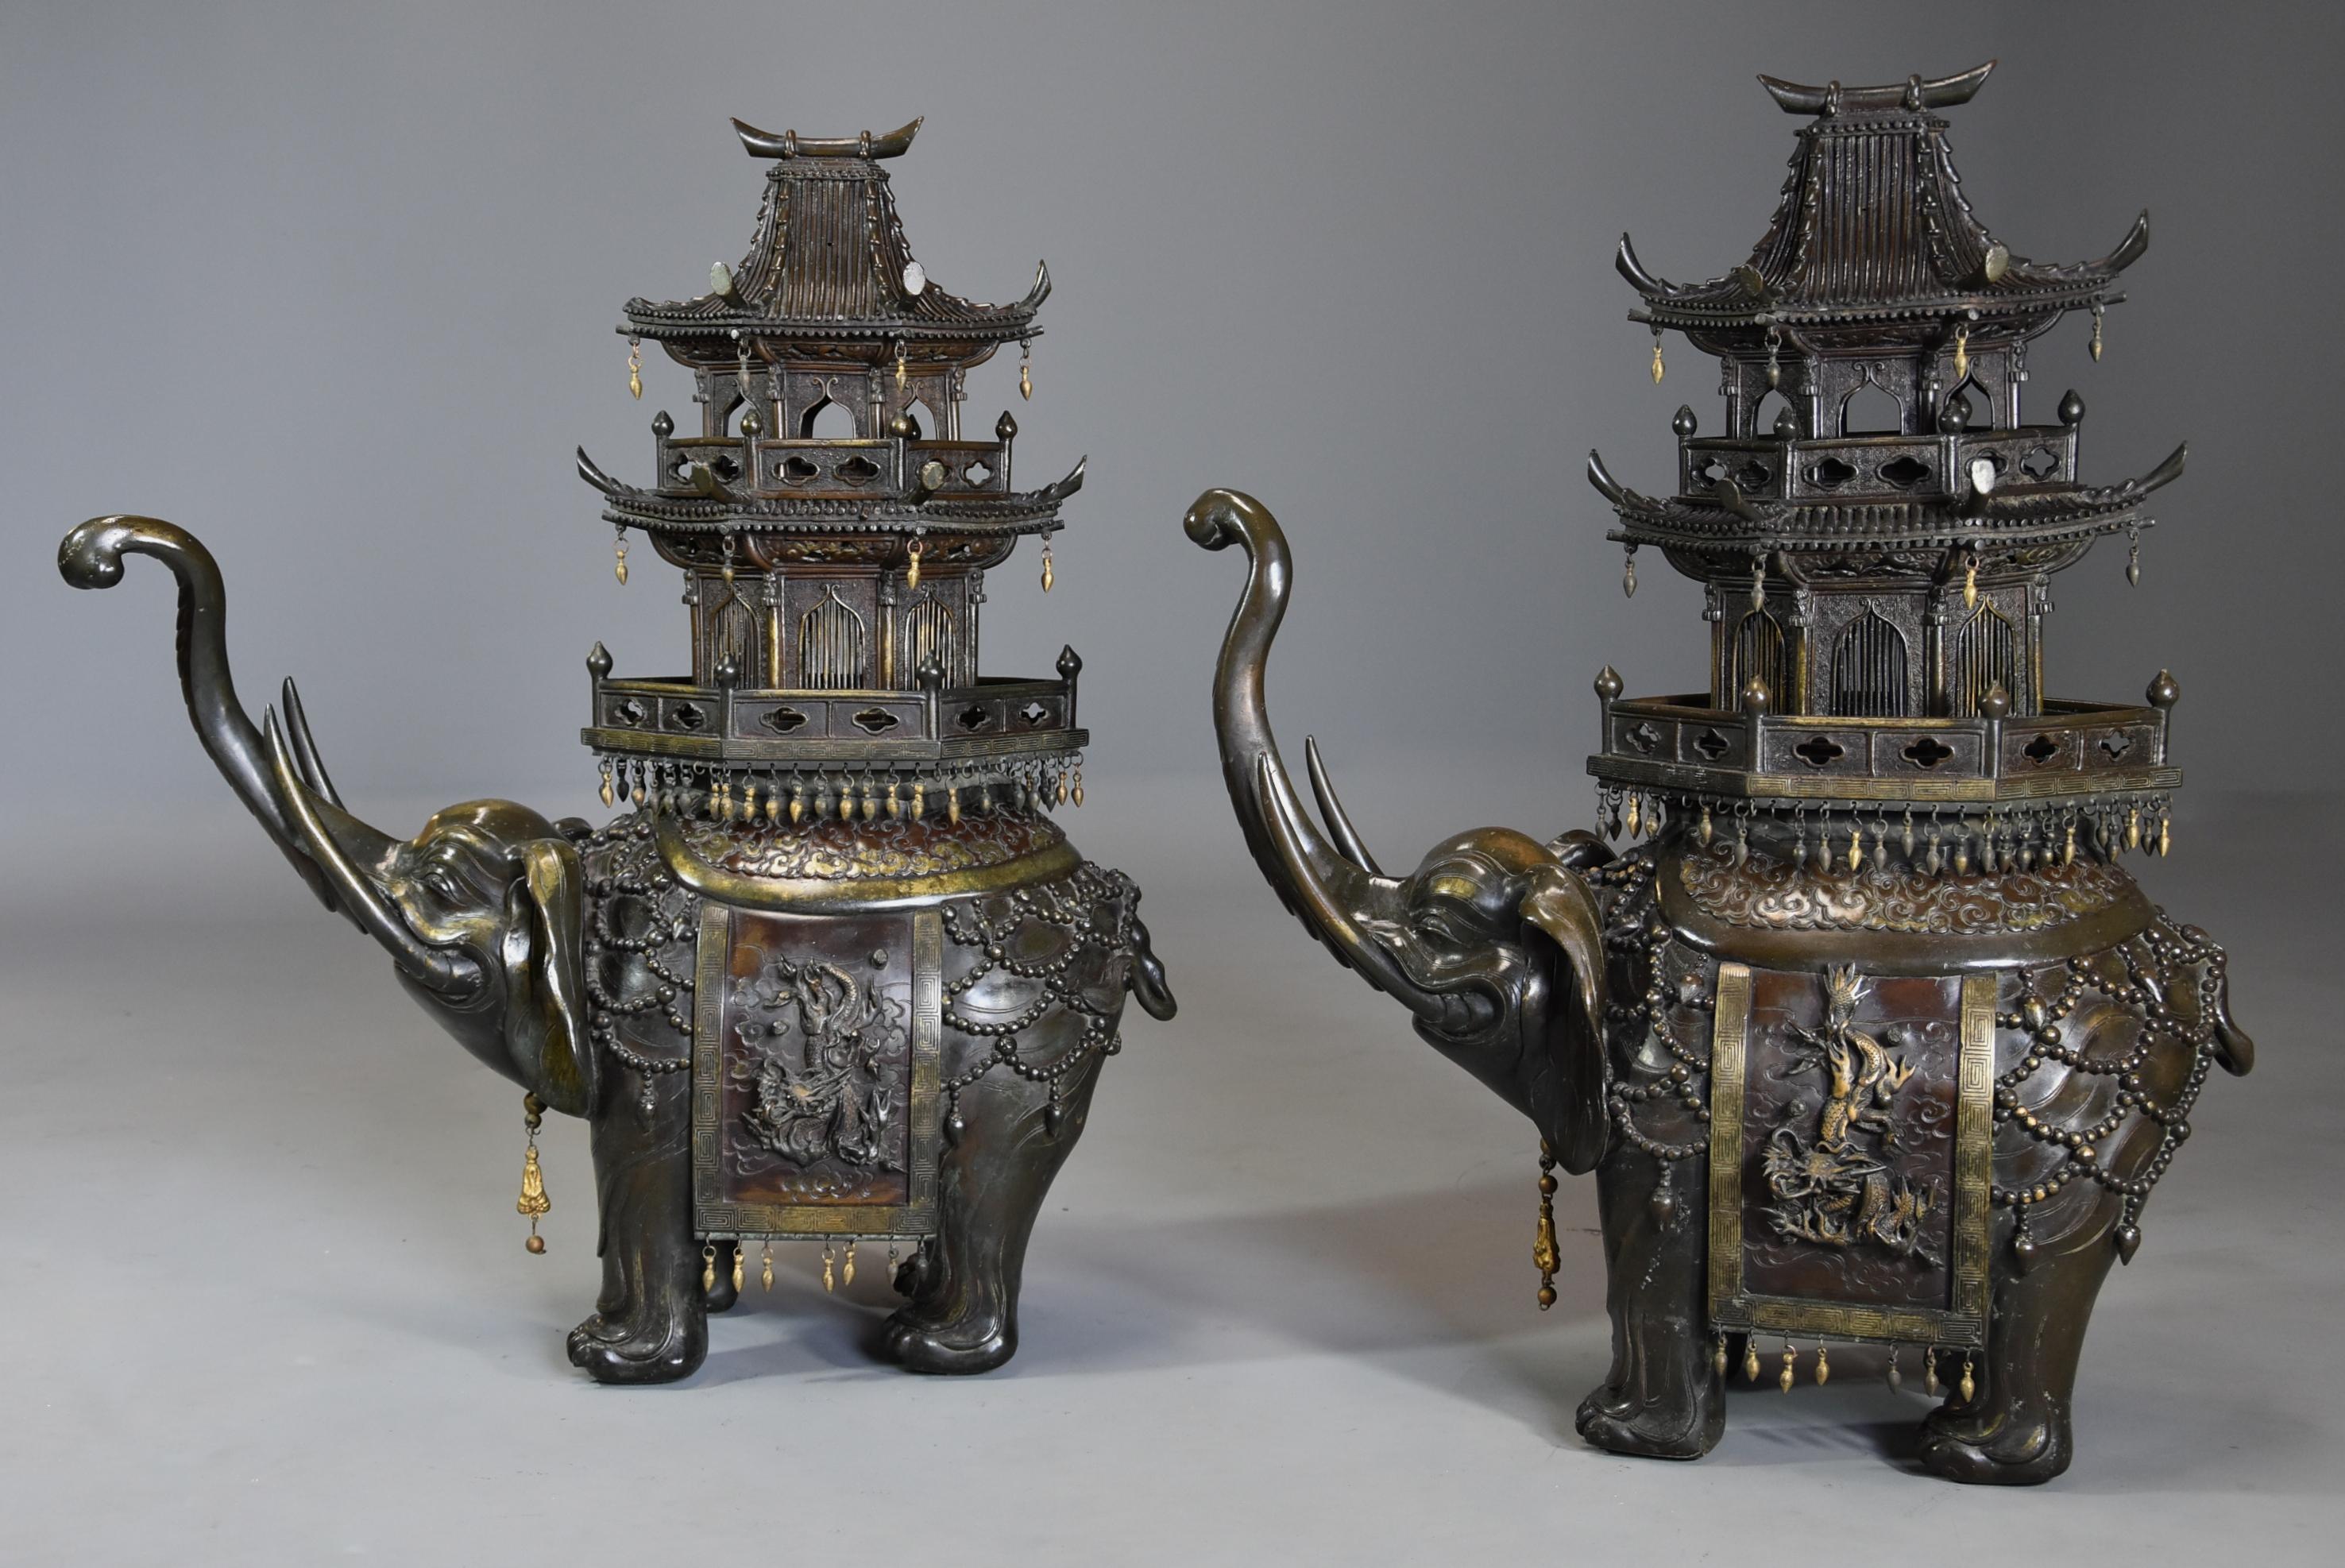 Pair of Large 19th Century Japanese Meiji Bronze Elephant Incense Burners For Sale 4